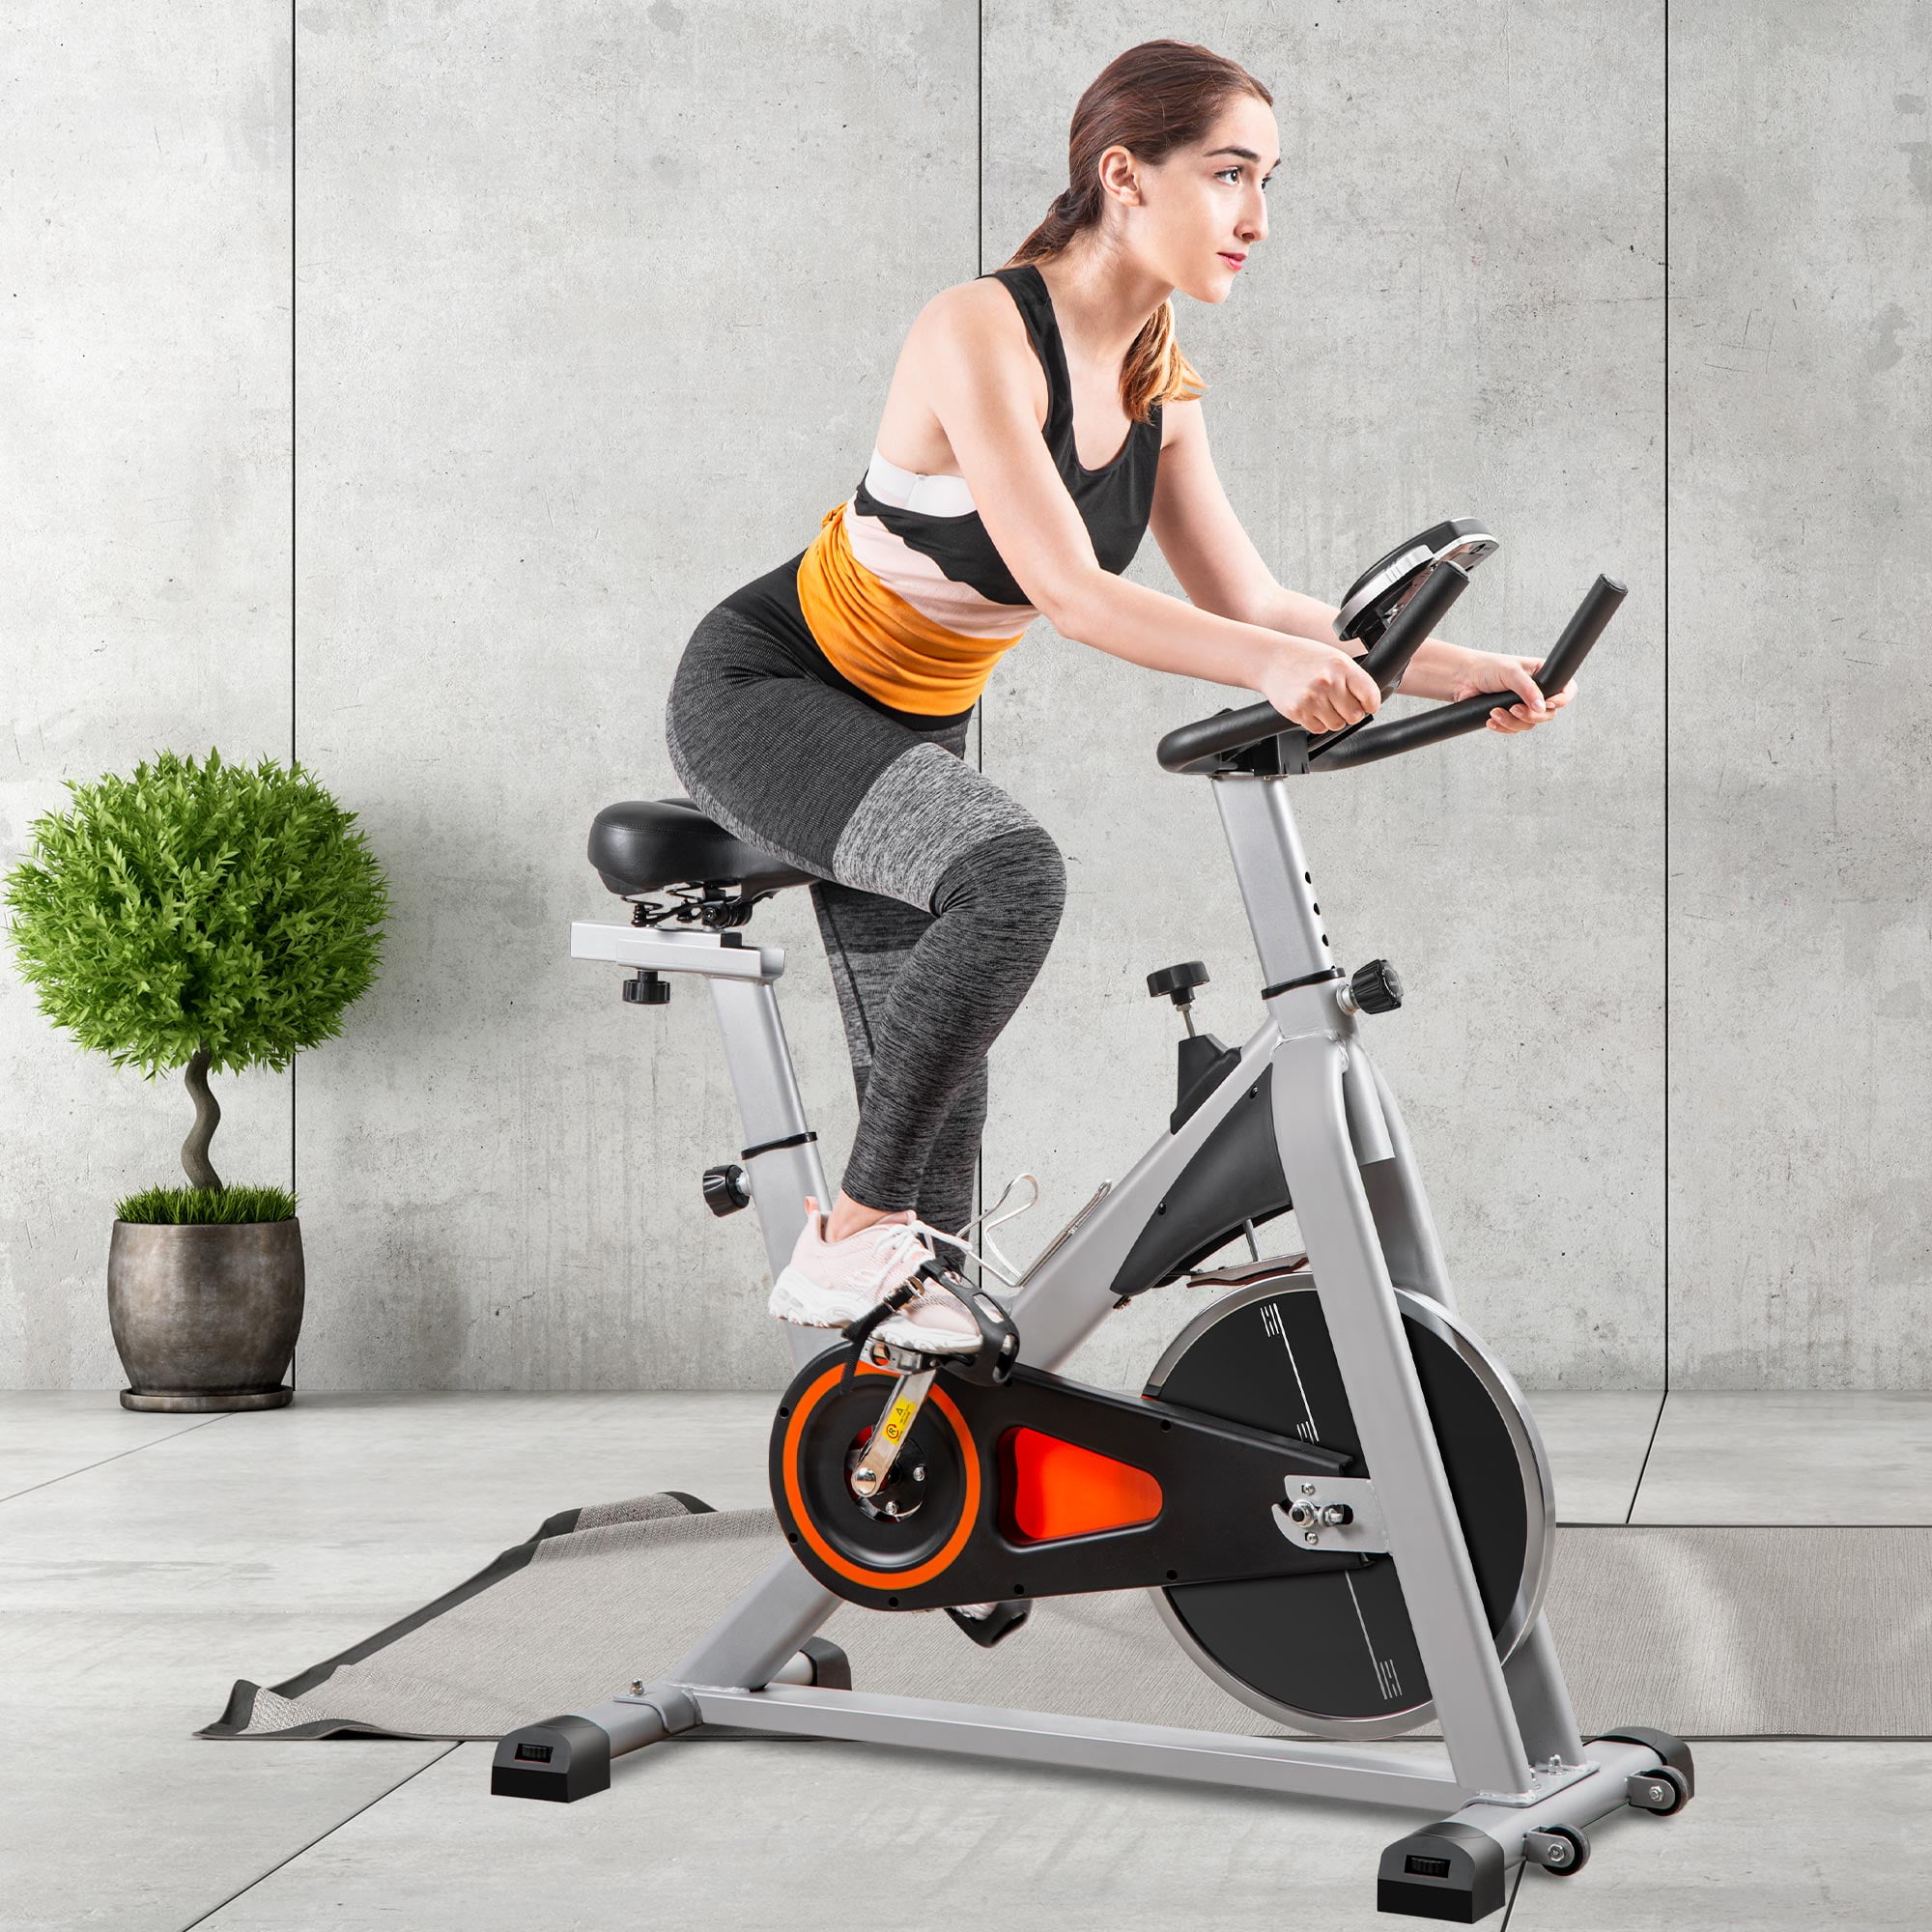 Details about   Stationary Exercise Bike Indoor Cycling Bicycle Aerobics Workout Gym Fitness US 